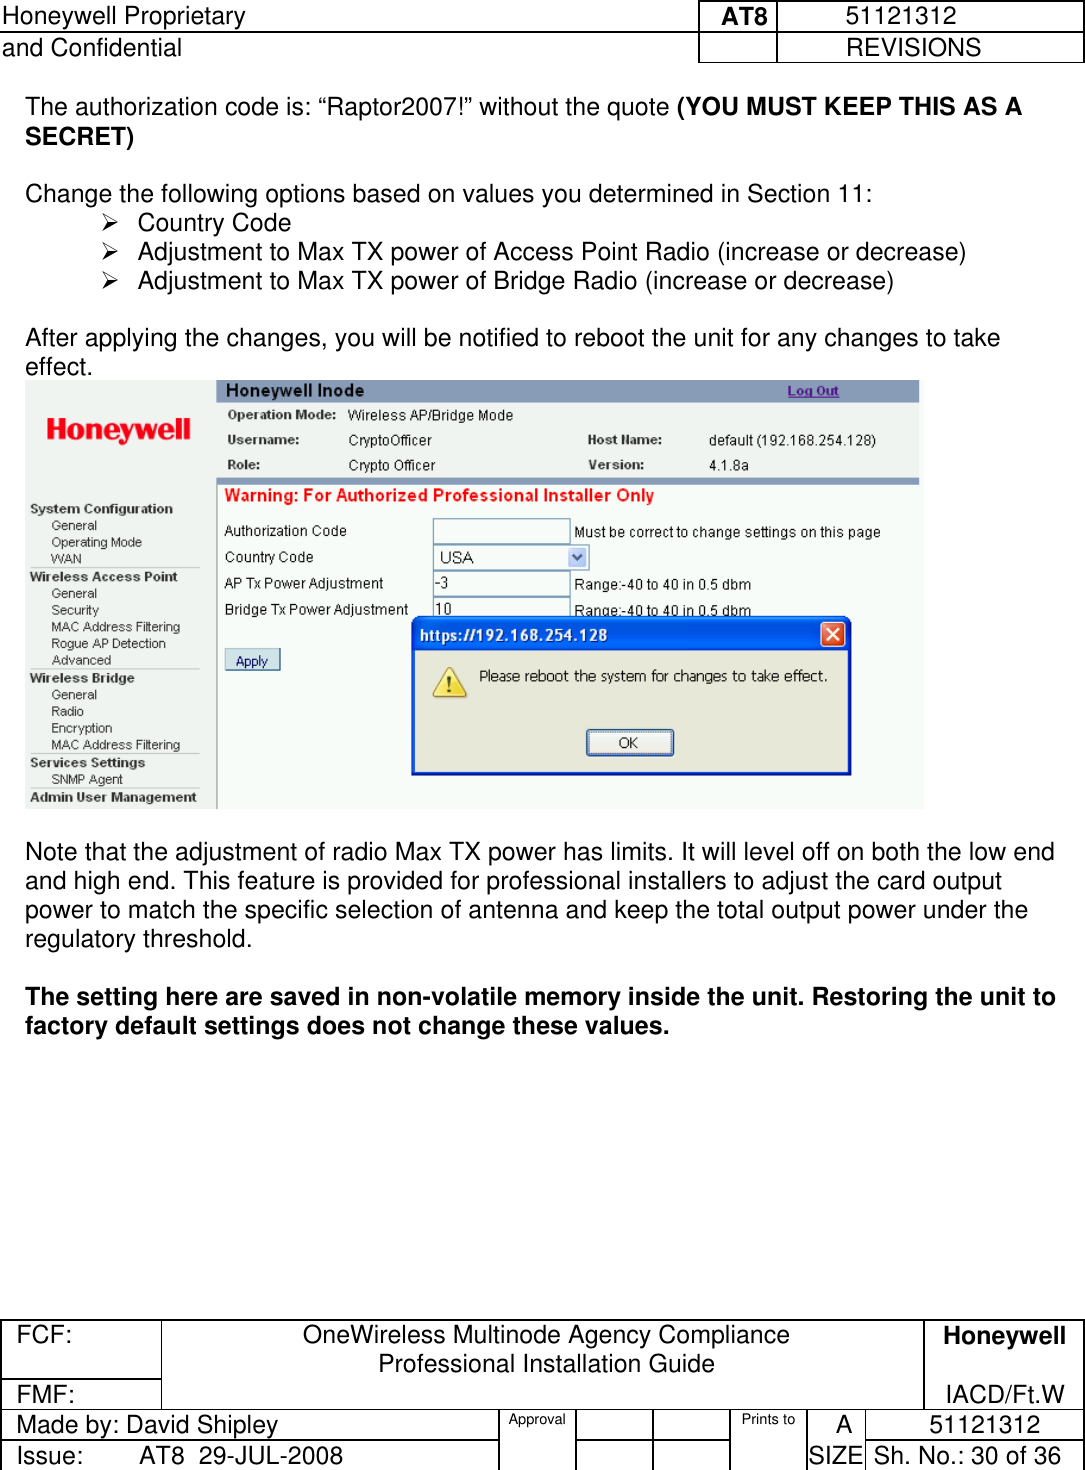 Honeywell Proprietary     AT8          51121312 and Confidential             REVISIONS  FCF:  OneWireless Multinode Agency Compliance Professional Installation Guide  Honeywell FMF:               IACD/Ft.W Made by: David Shipley  Approval   Prints to     A           51121312 Issue:        AT8  29-JUL-2008          SIZE  Sh. No.: 30 of 36  The authorization code is: “Raptor2007!” without the quote (YOU MUST KEEP THIS AS A SECRET)  Change the following options based on values you determined in Section 11:    Country Code  Adjustment to Max TX power of Access Point Radio (increase or decrease)  Adjustment to Max TX power of Bridge Radio (increase or decrease)  After applying the changes, you will be notified to reboot the unit for any changes to take effect.   Note that the adjustment of radio Max TX power has limits. It will level off on both the low end and high end. This feature is provided for professional installers to adjust the card output power to match the specific selection of antenna and keep the total output power under the regulatory threshold.  The setting here are saved in non-volatile memory inside the unit. Restoring the unit to factory default settings does not change these values.  